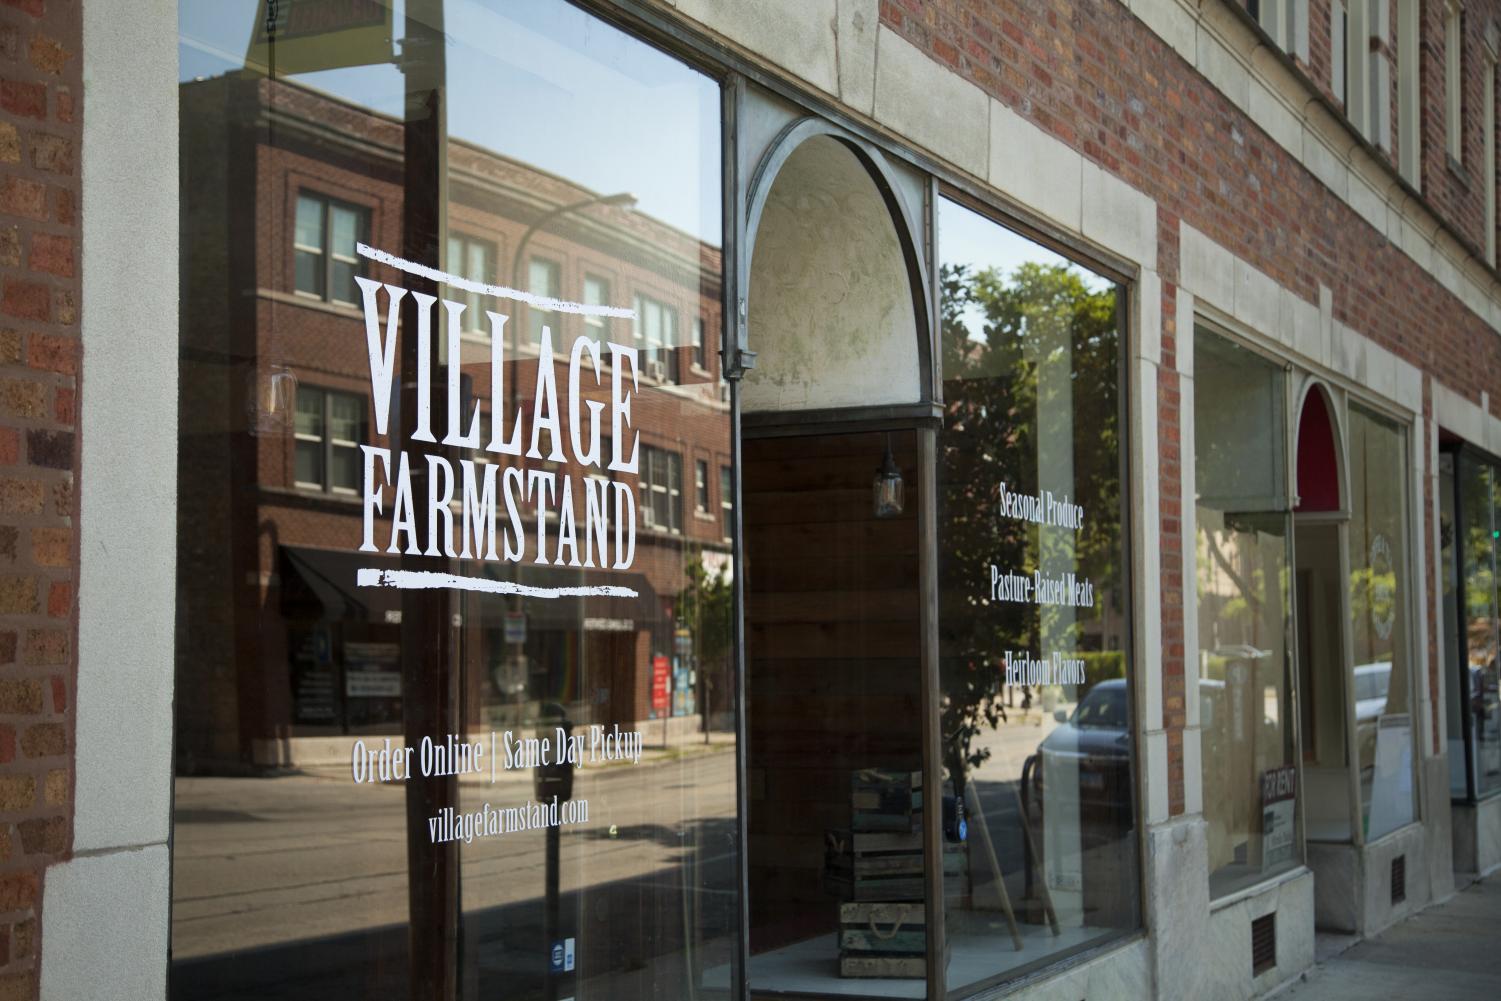 Matt+Wechsler+founded+Village+Farmstand.+The+storefront+opened+its+doors+on+Dempster+Street+in+August.